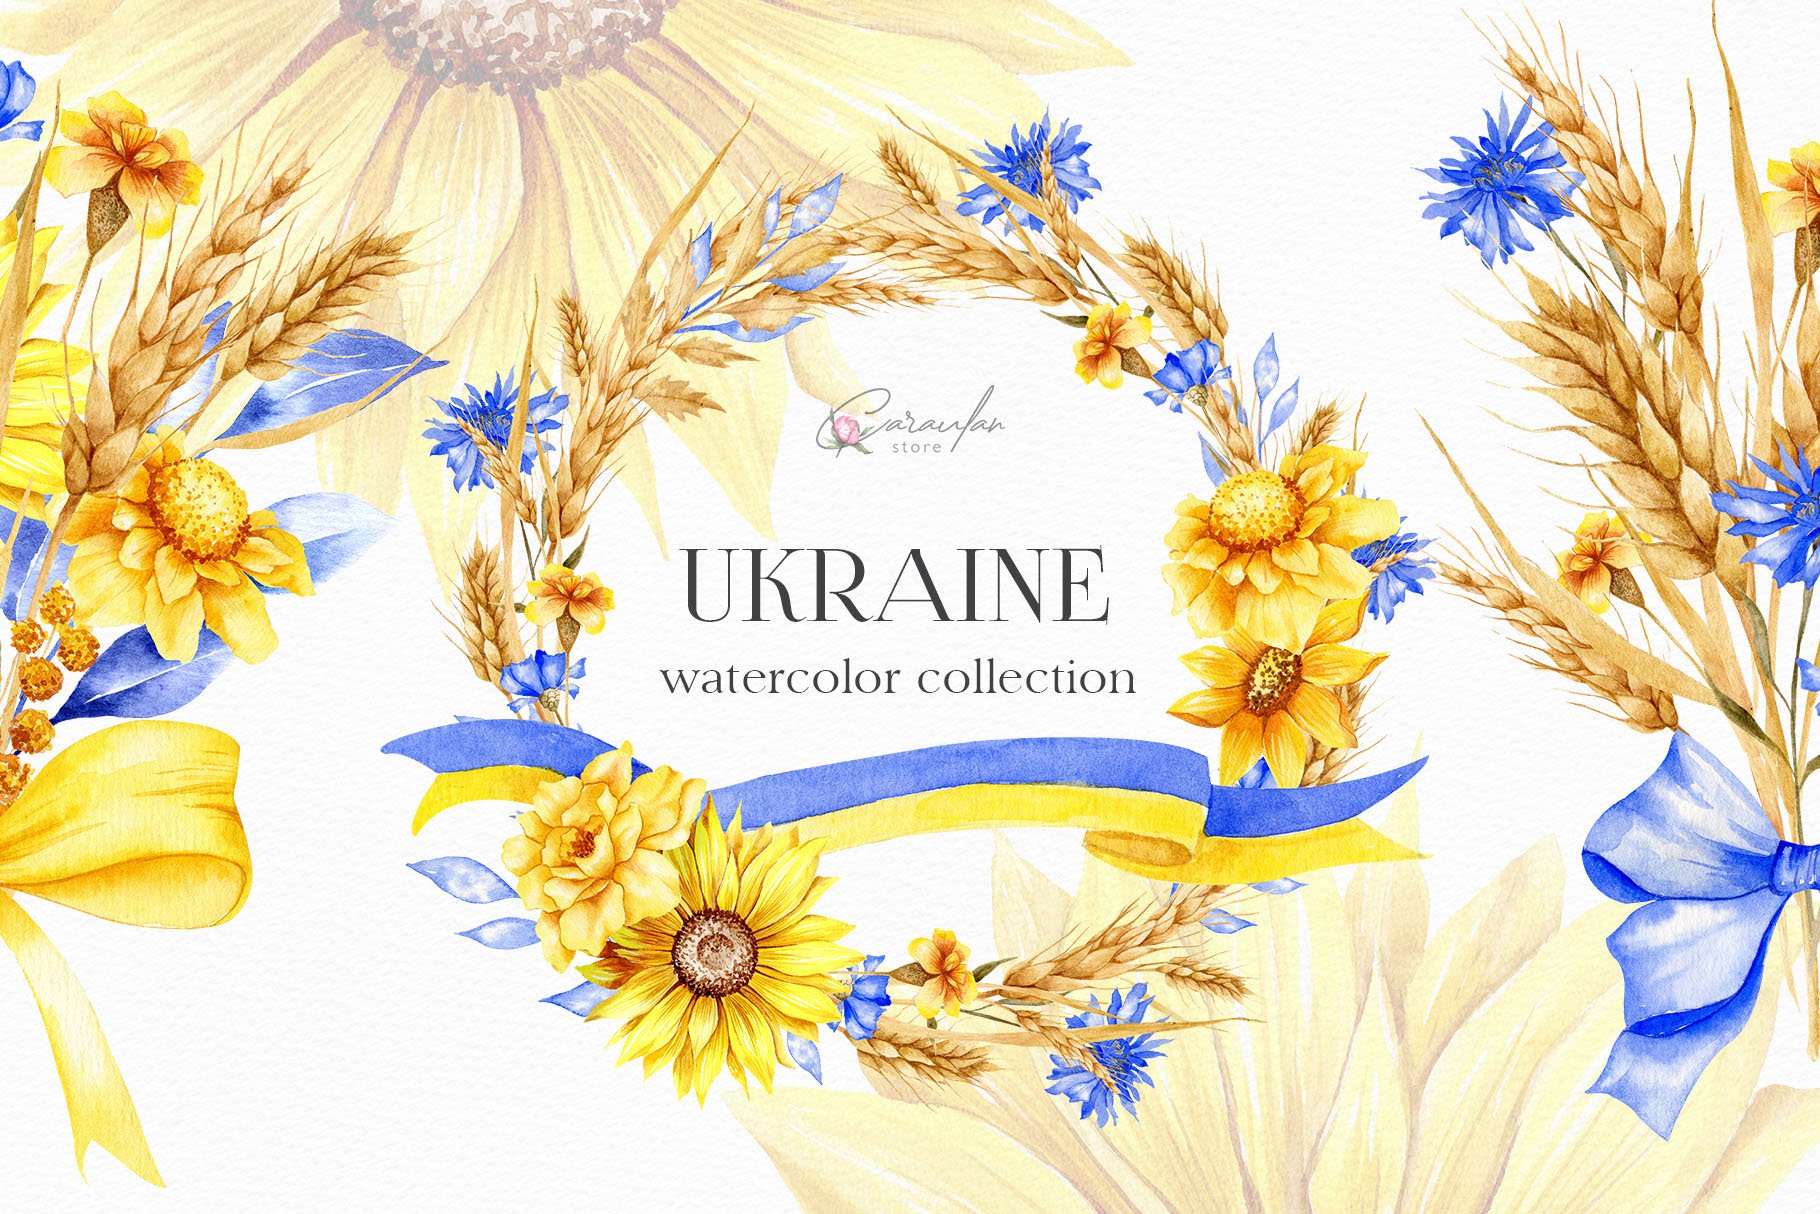 Ukraine. Watercolor Collection. cover image.